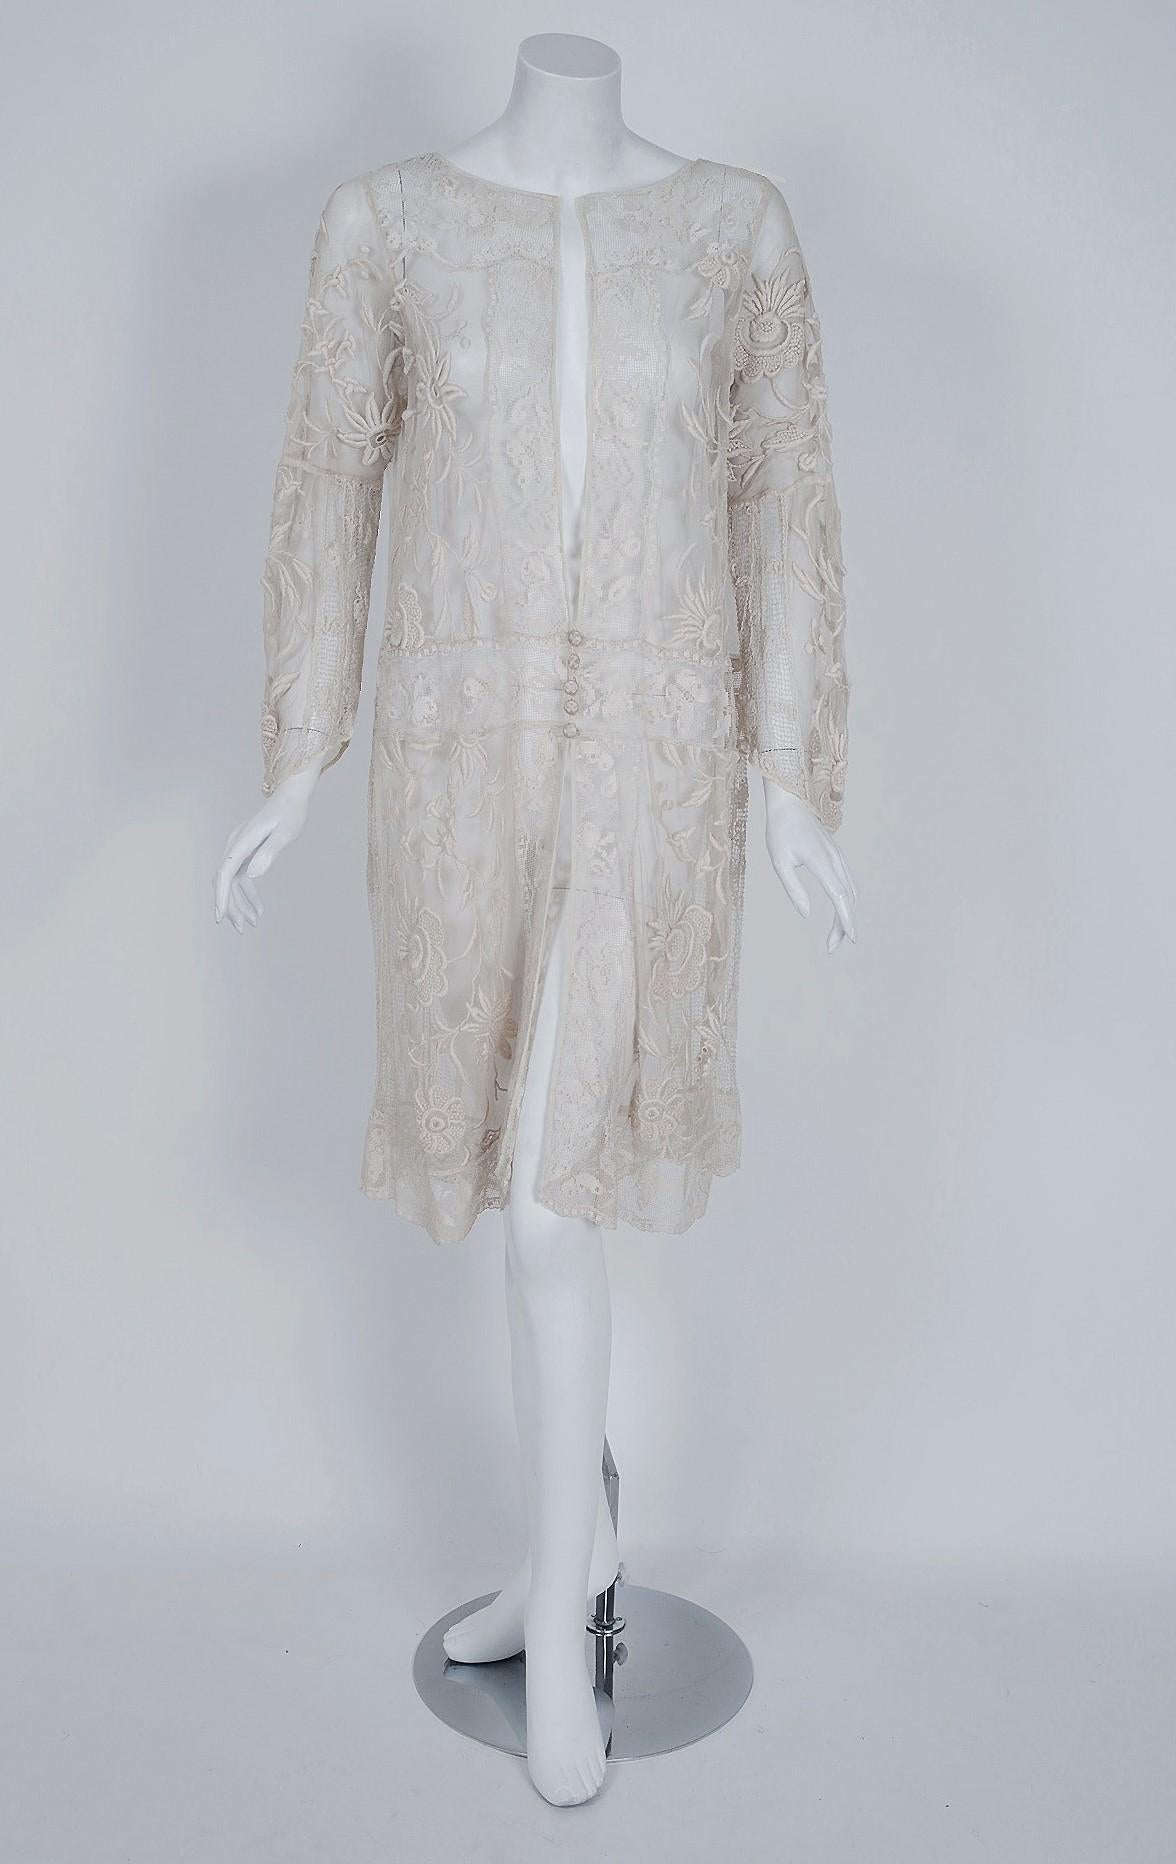 This is an early 1920's ethereal masterpiece. The unique unstructured style is strikingly modern yet the abundance of handmade filet crochet-lace and embroidered floral sheer-net is a treasure trove of antique needle art. Just look at the